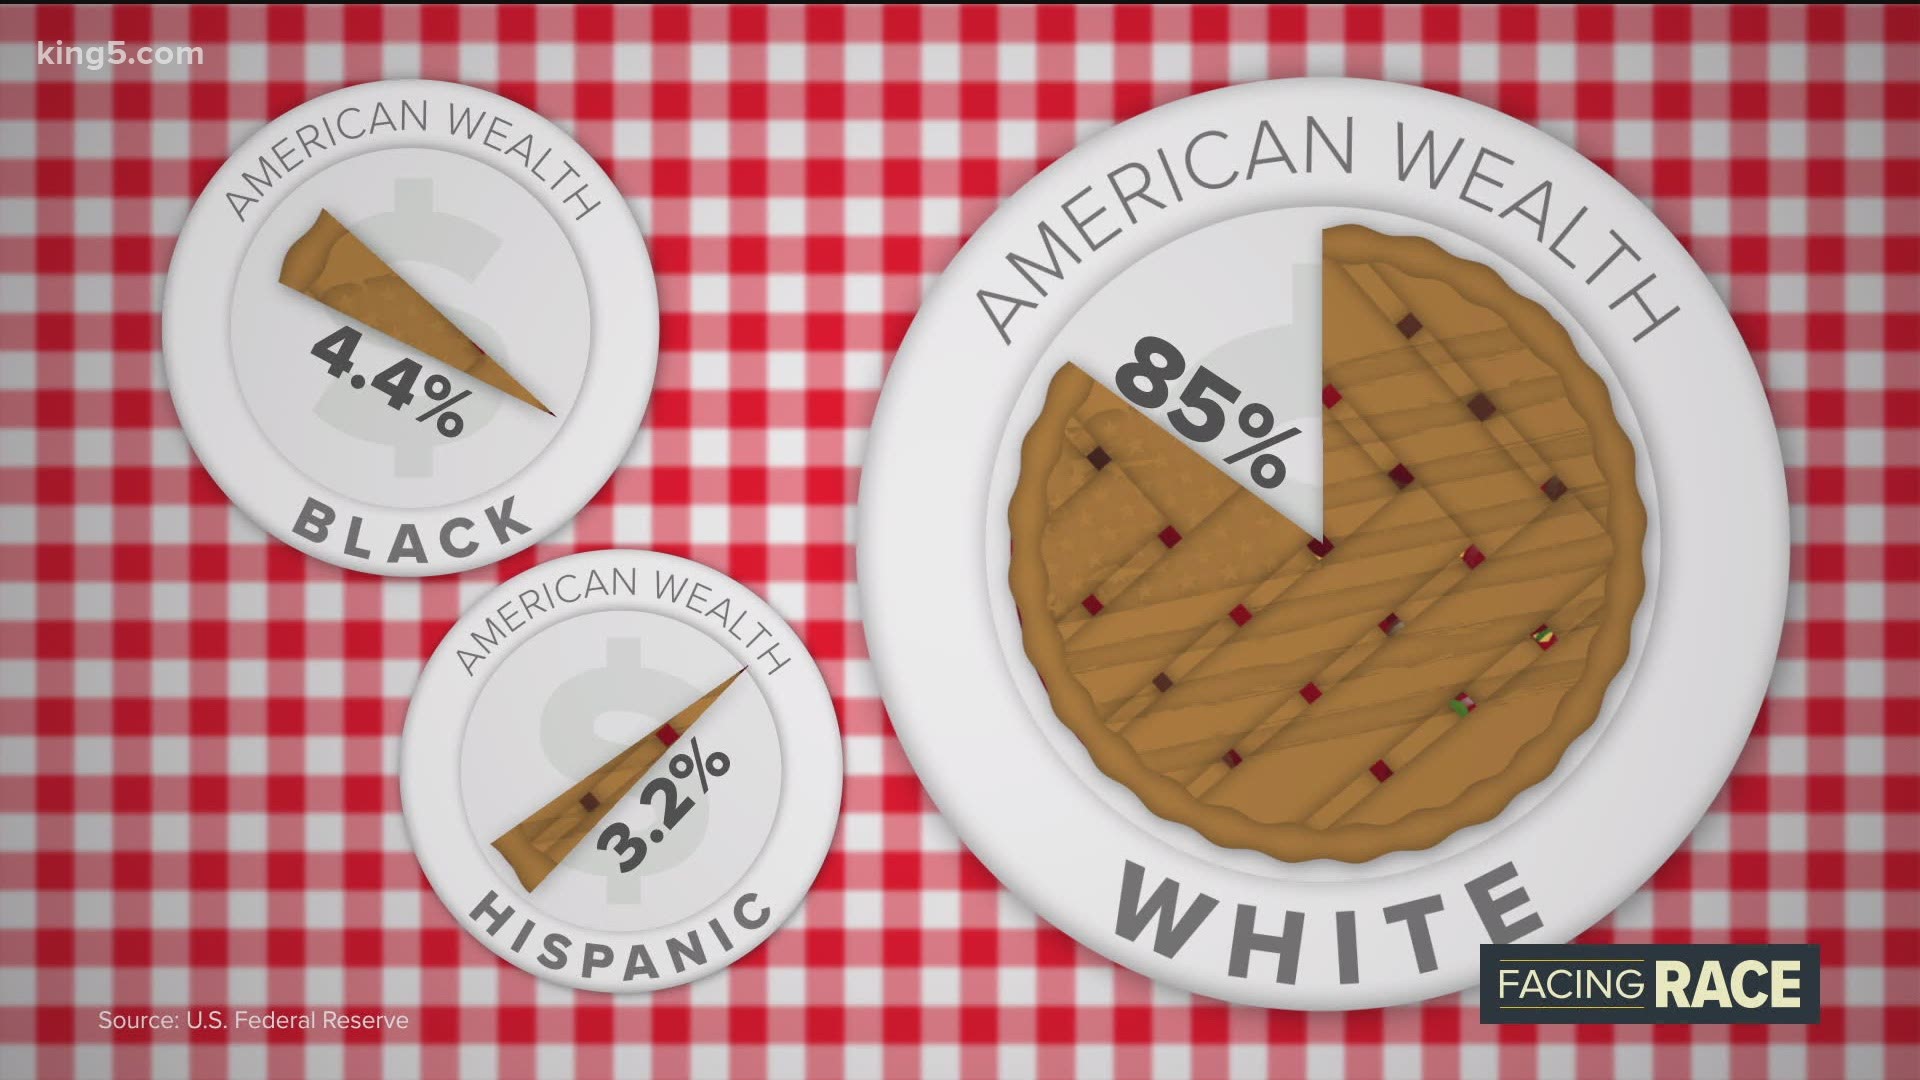 You may think racism in America is caused by a few bad apples. But this animation shows how it's a systemic problem.